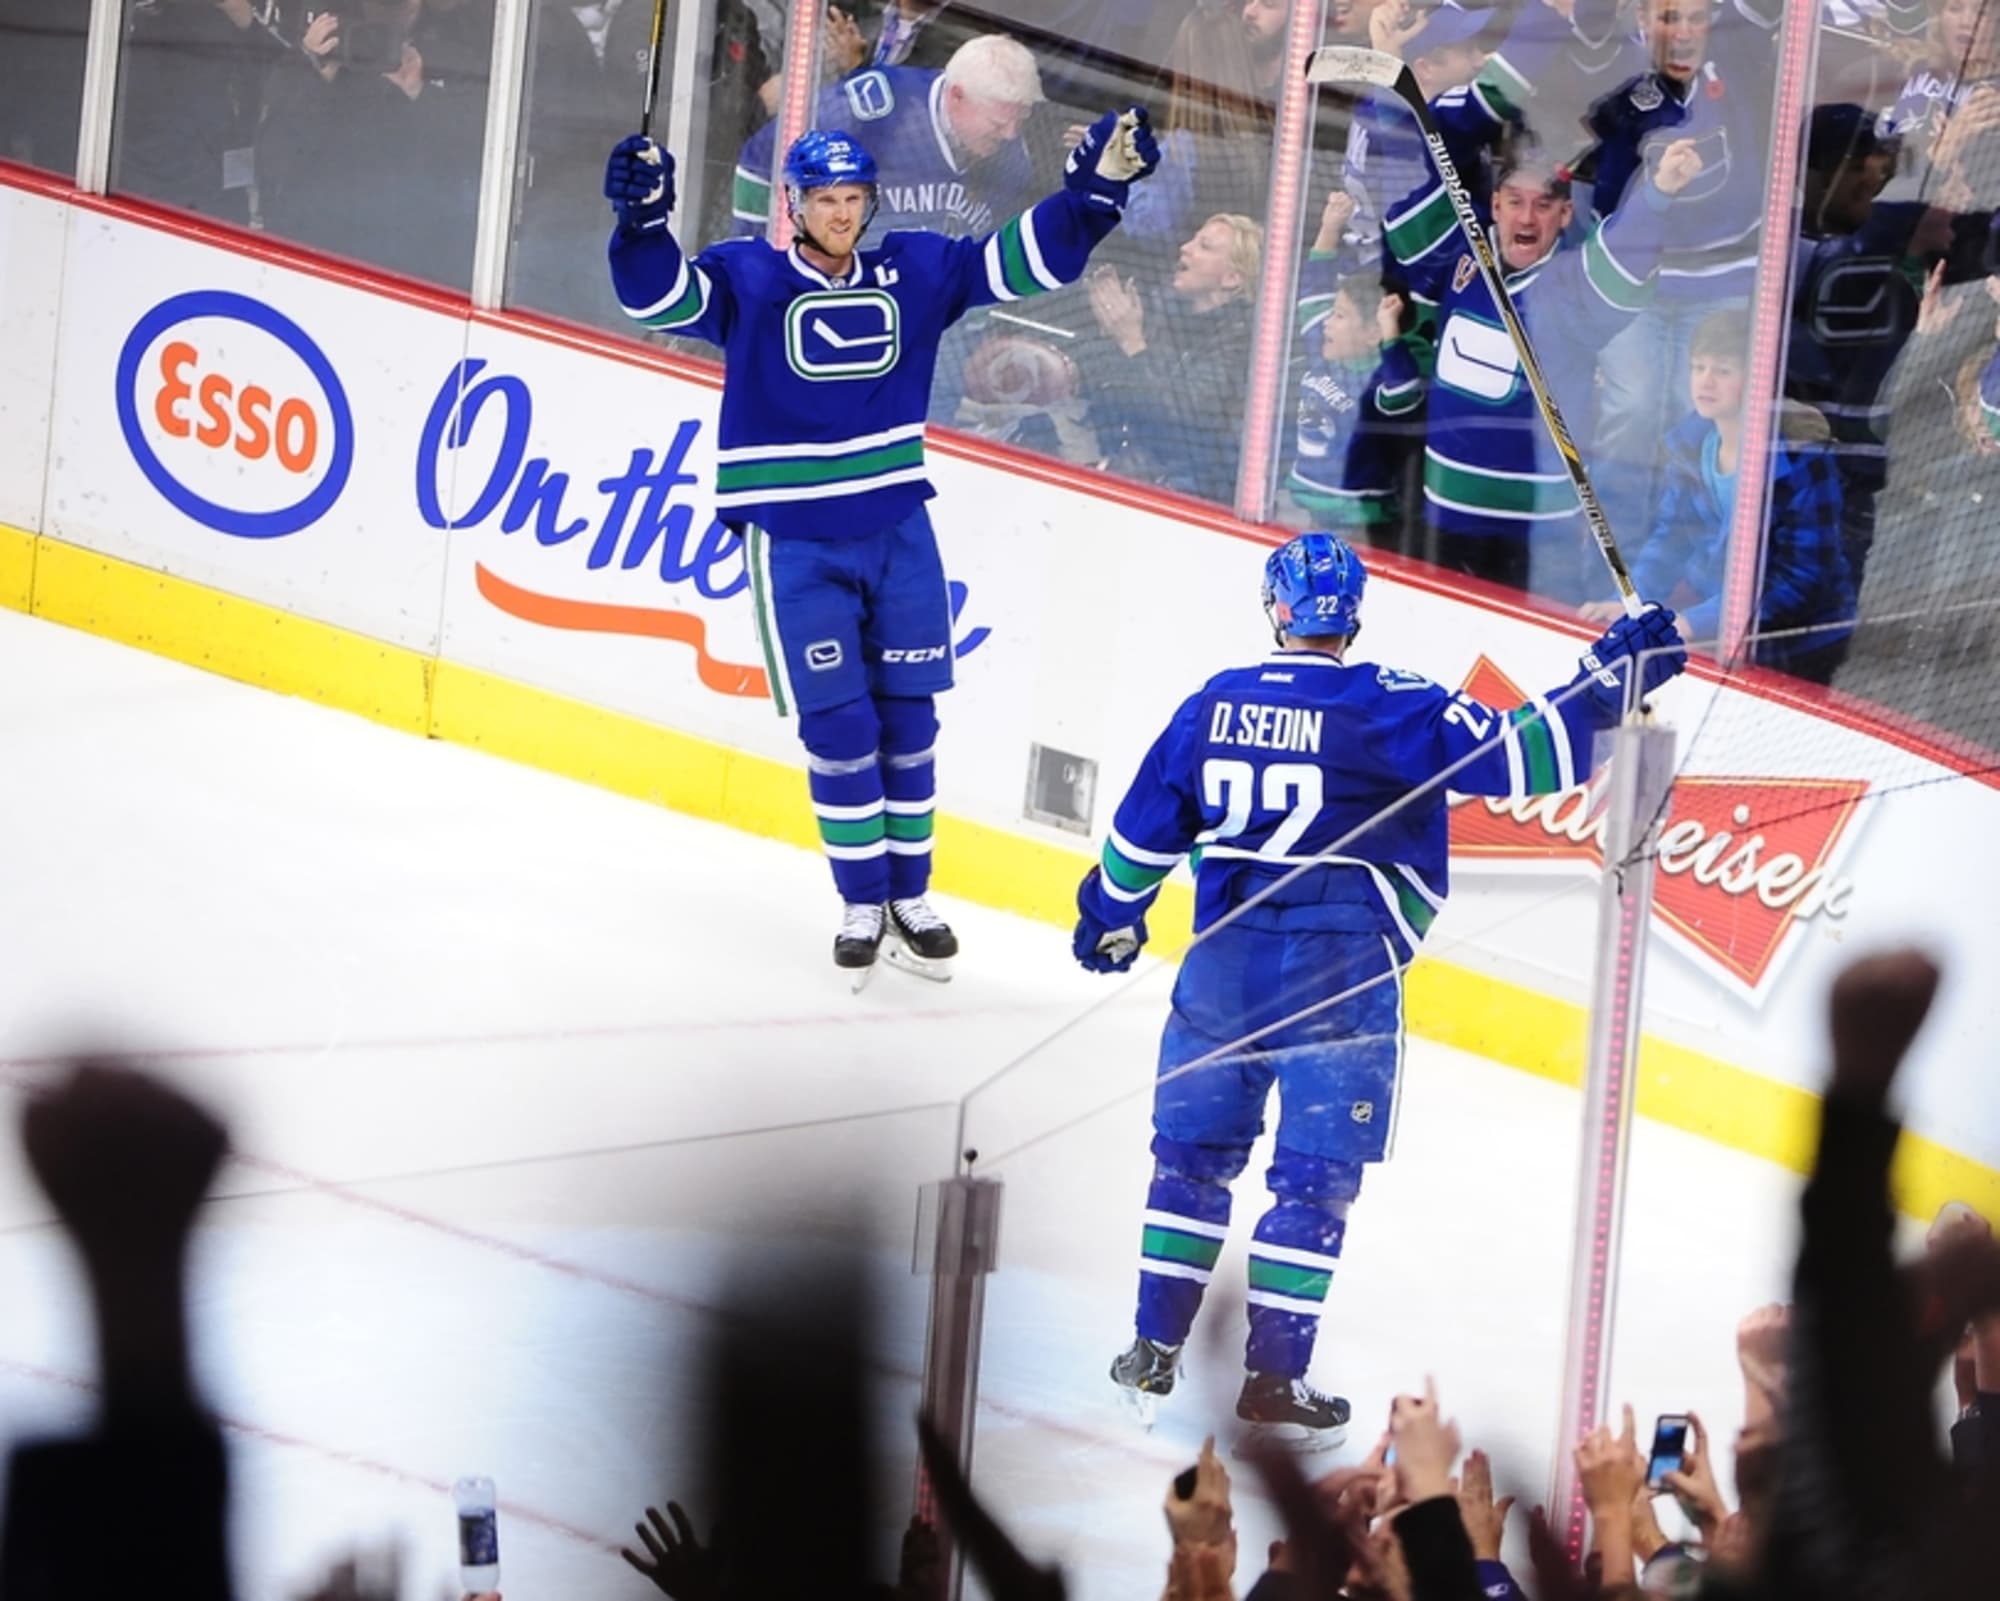 Canucks: Lundqvist's history with the Sedin twins goes back a ways